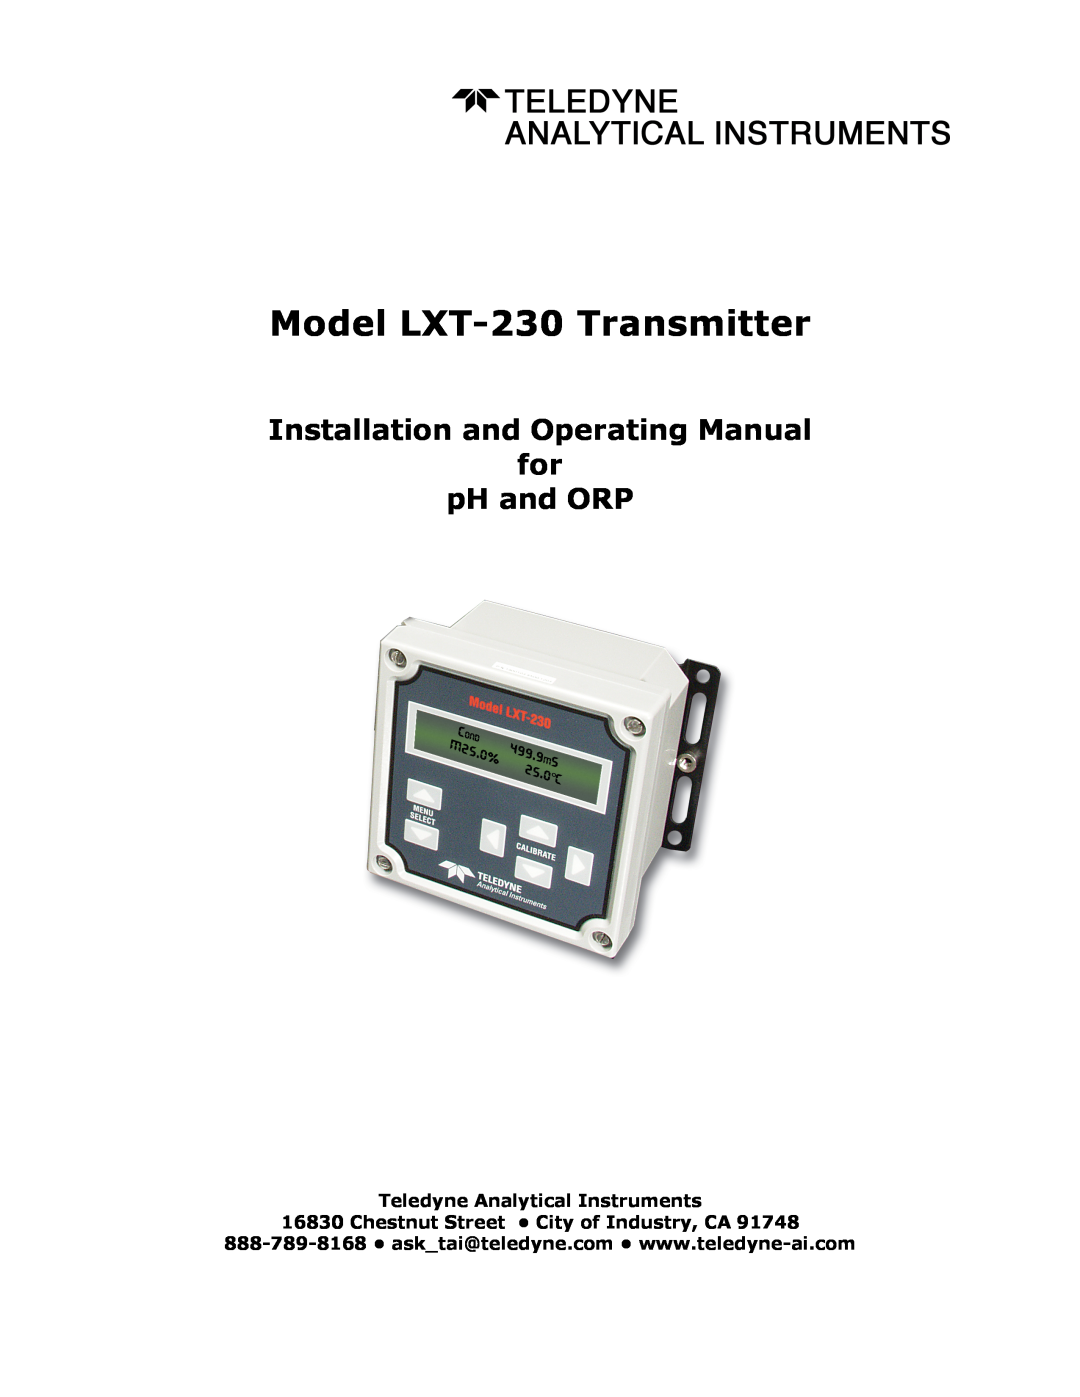 Teledyne manual Model LXT-230Transmitter, Installation and Operating Manual for pH and ORP 